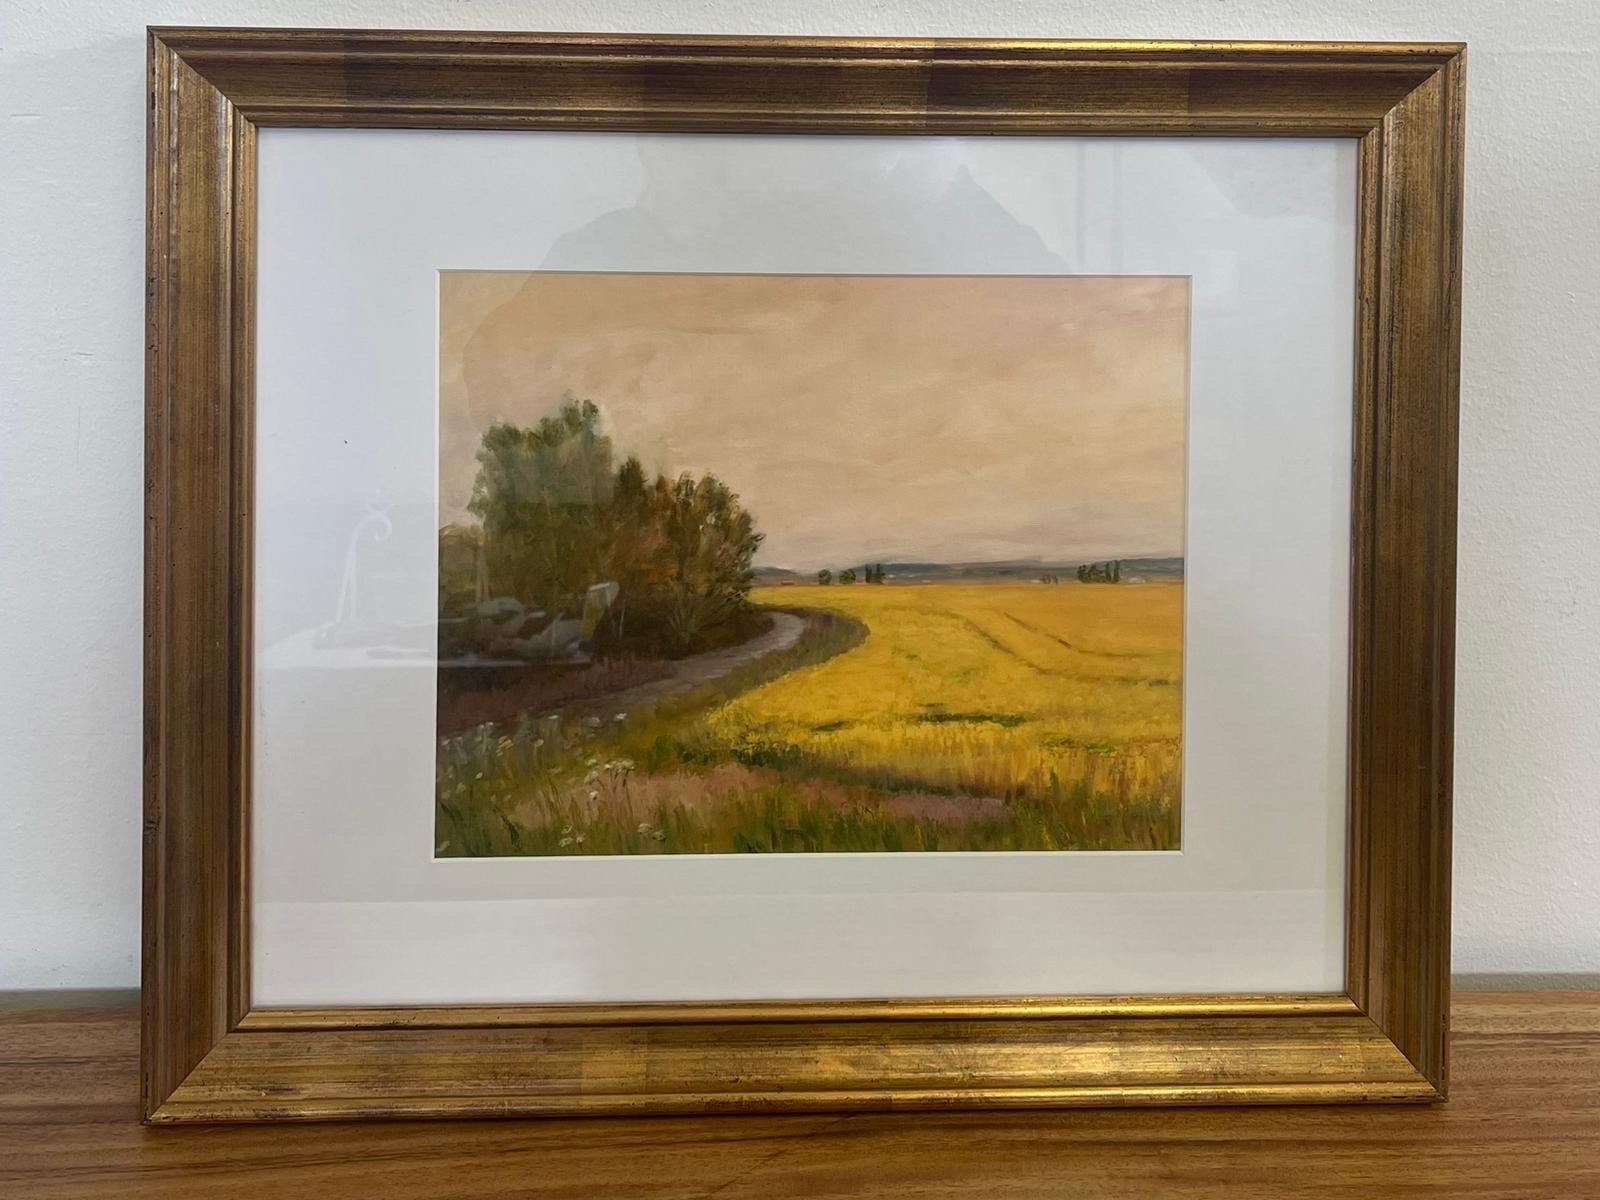 Helen Drummond is a Seattle based Artist, specializing in oil painting. Her makers mark is on the back of the print as shown. Framed and Matted with gold toned framing. Vintage Condition Consistent with Age as Pictured.

Dimensions. 23 W ; 1 D ; 19 H